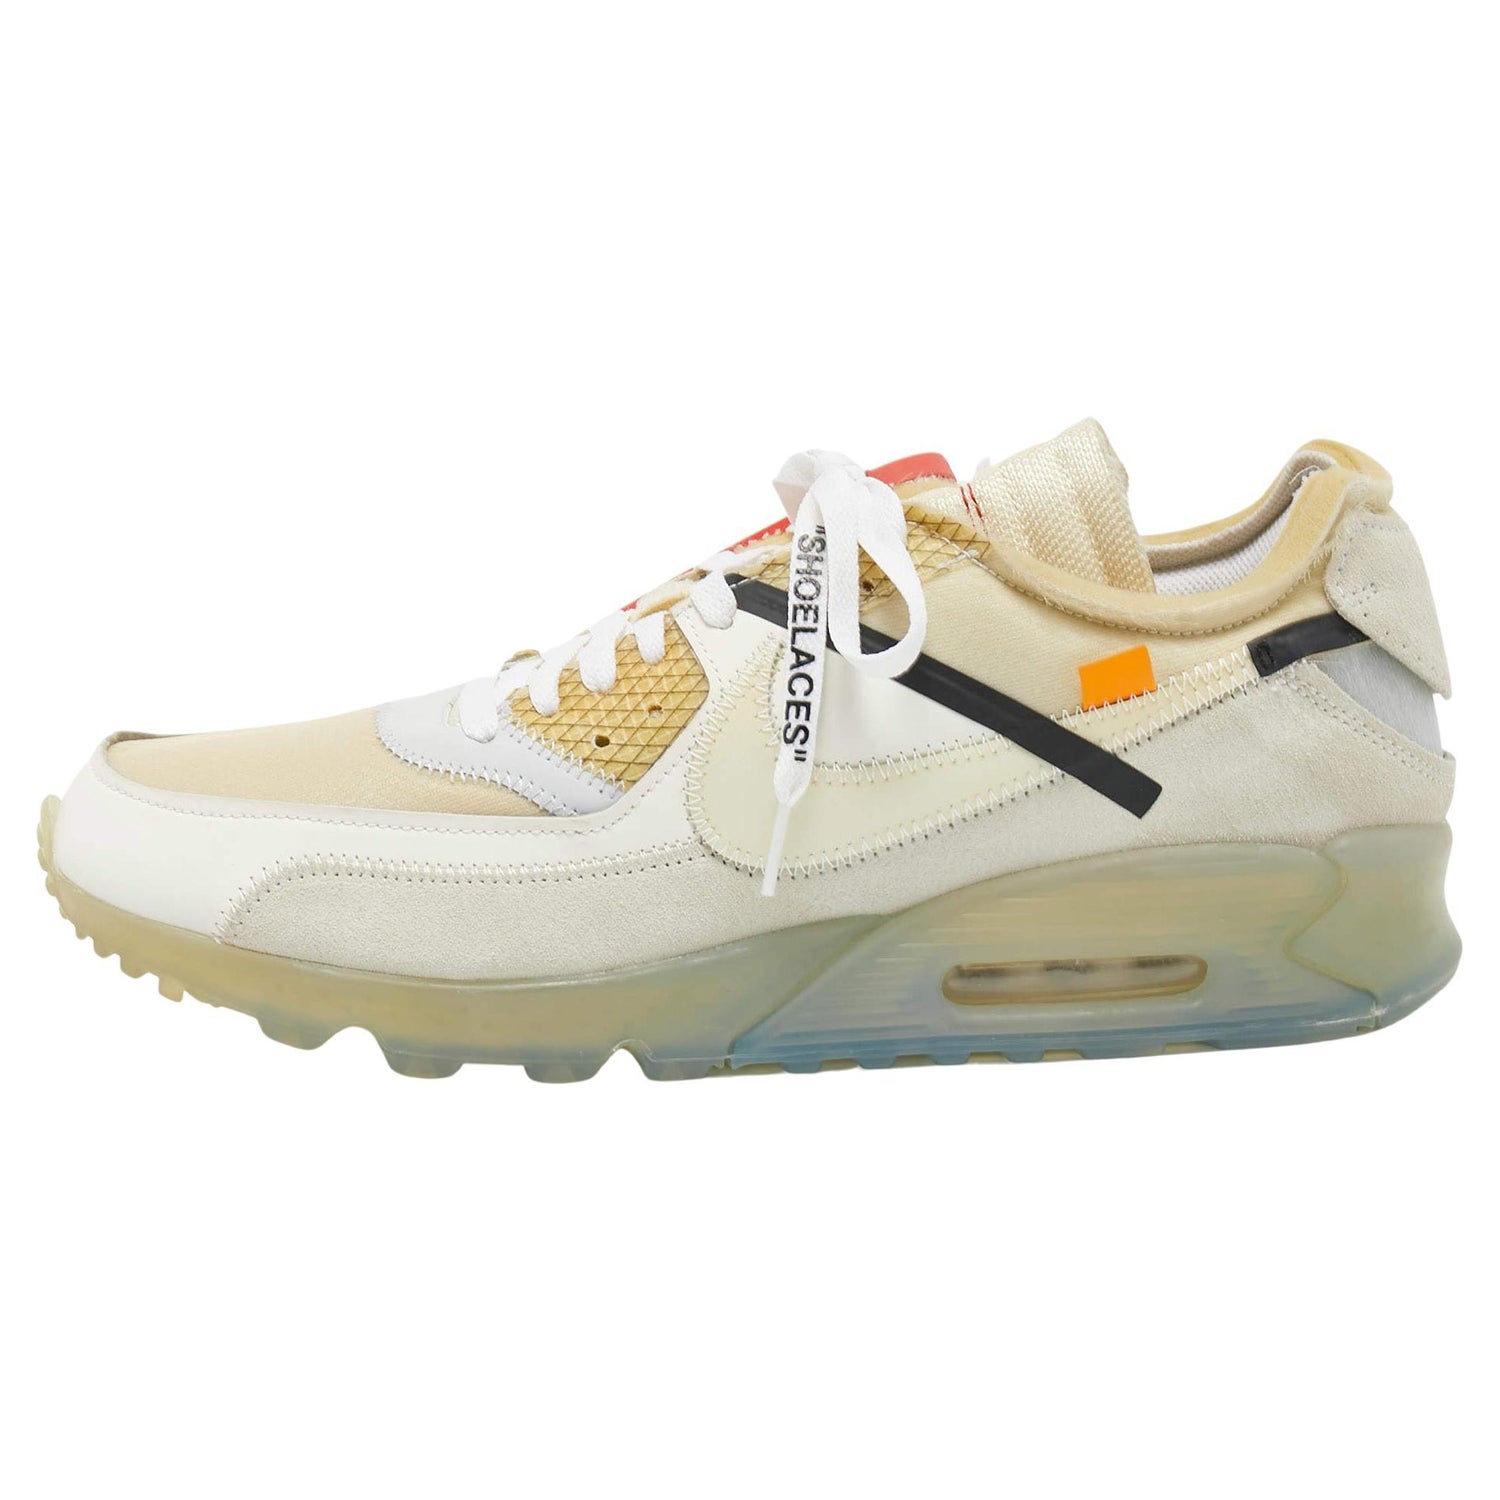 Nike Air Max - 6 For Sale on 1stDibs | nike air max made in vietnam price